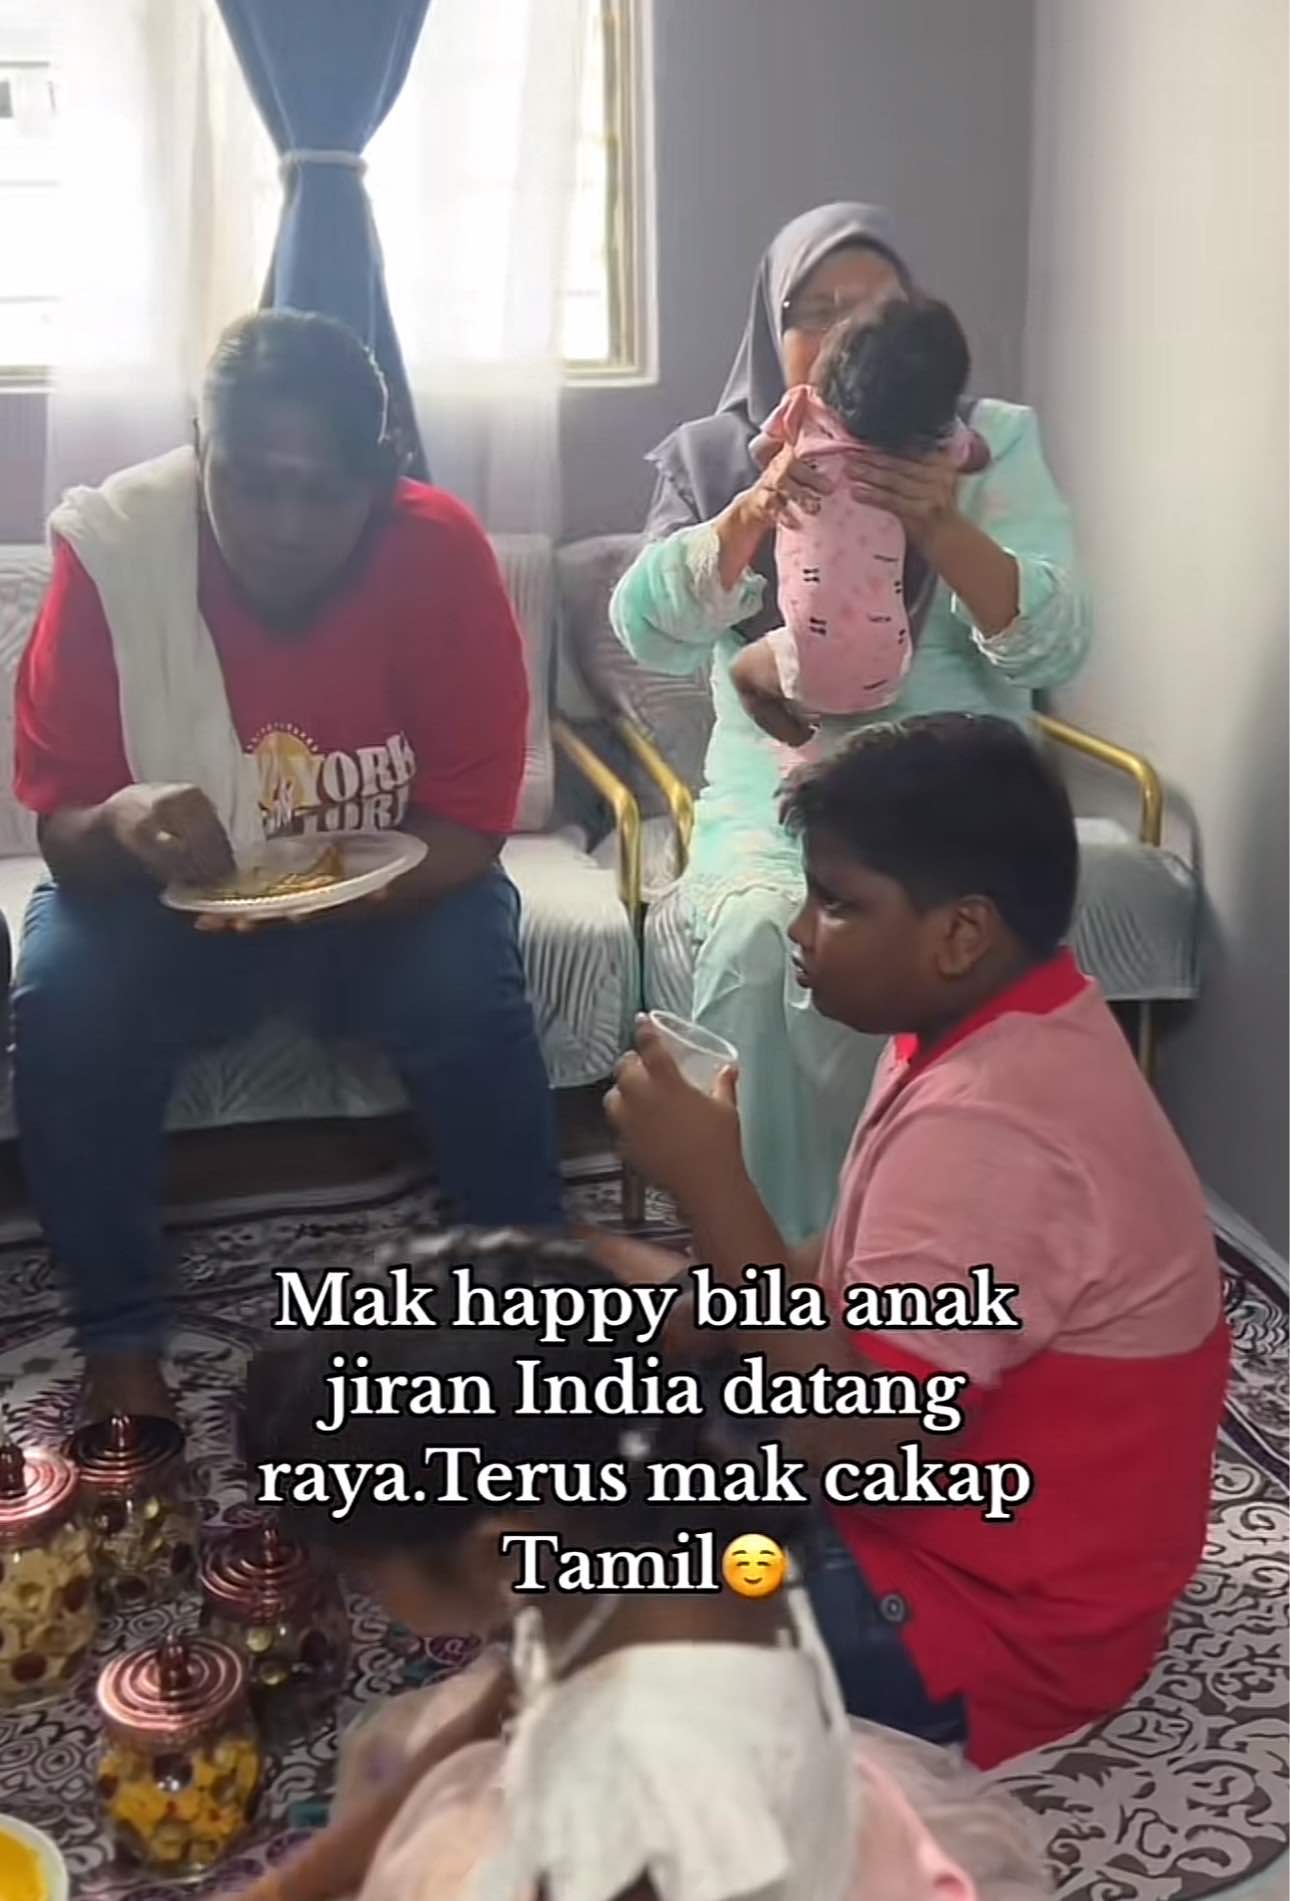 M'sian woman playing her with neighbor's daughter